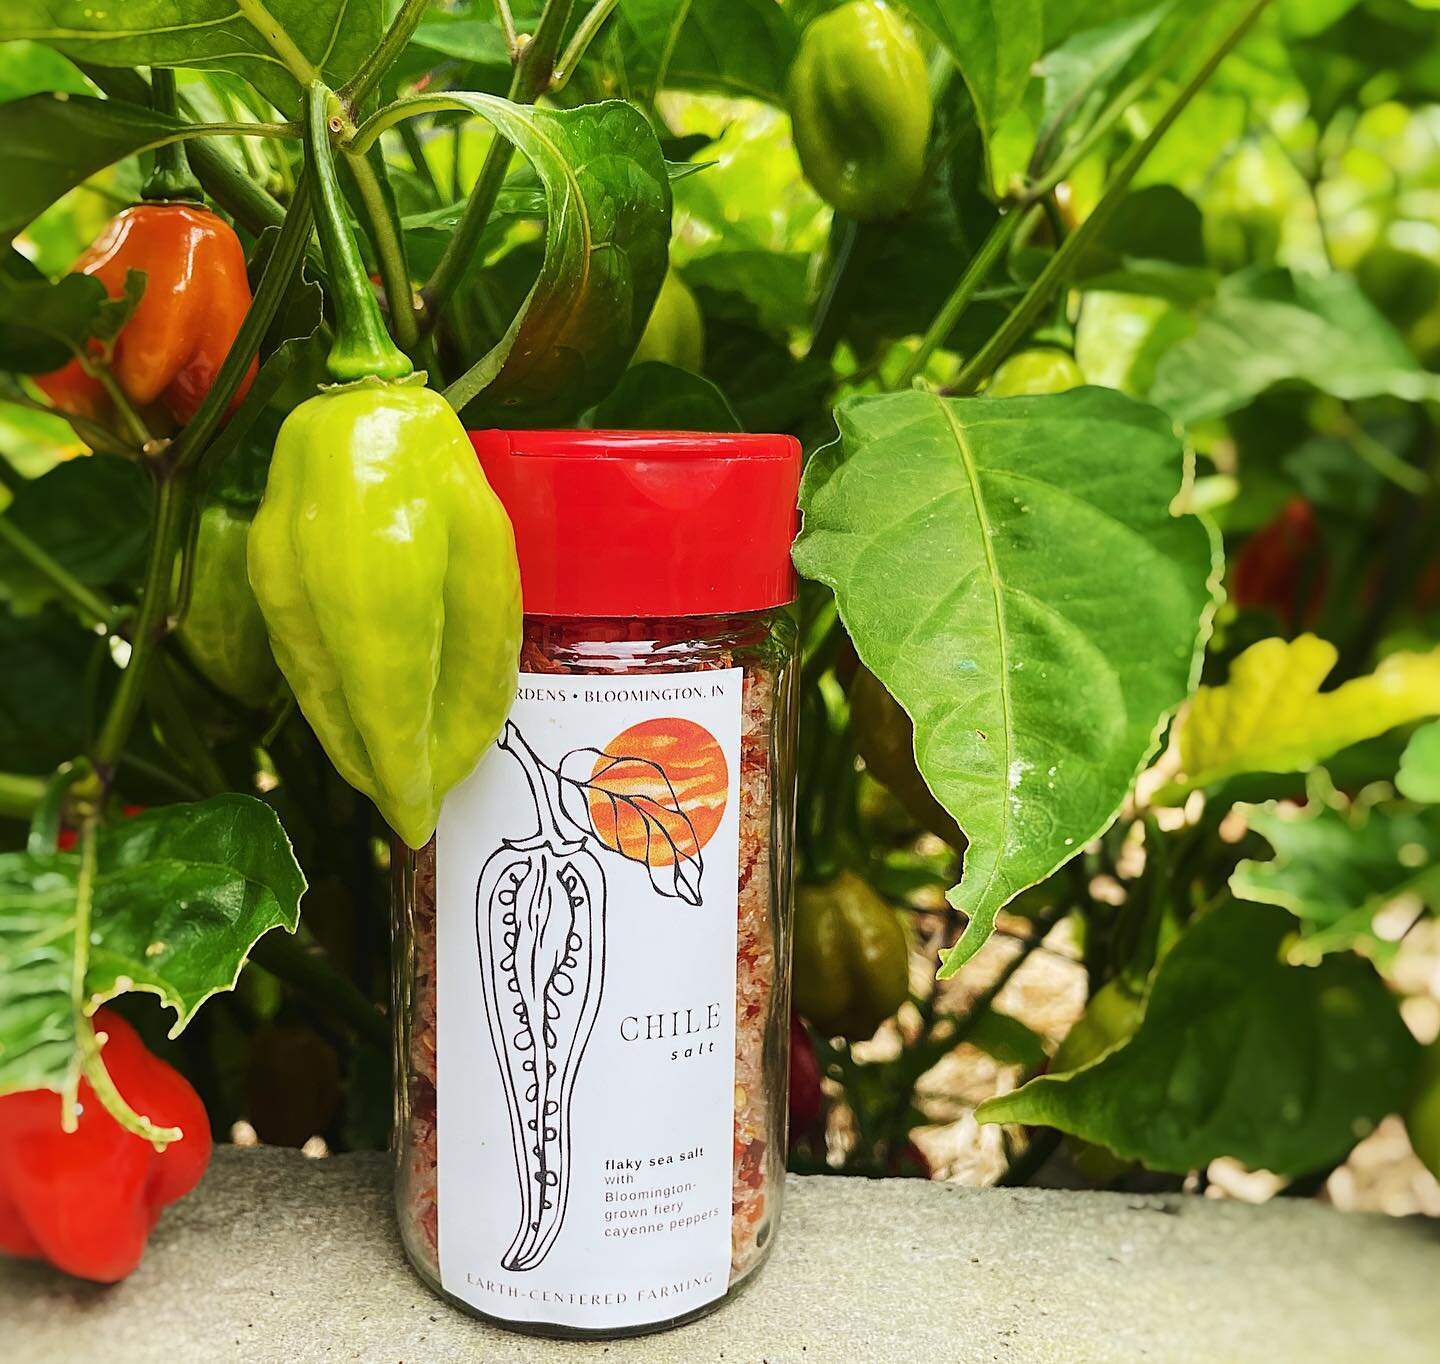 Chili salt abound! Our dried, lovingly grown peppers blended with Maldon flaky sea salt make for a spicy finish to any dish. Sprinkle on top of grilled veggies, meats, popcorn or even focaccia. 🌶️💥 

Available now! 7 days a week @bloomingtonfarmsto